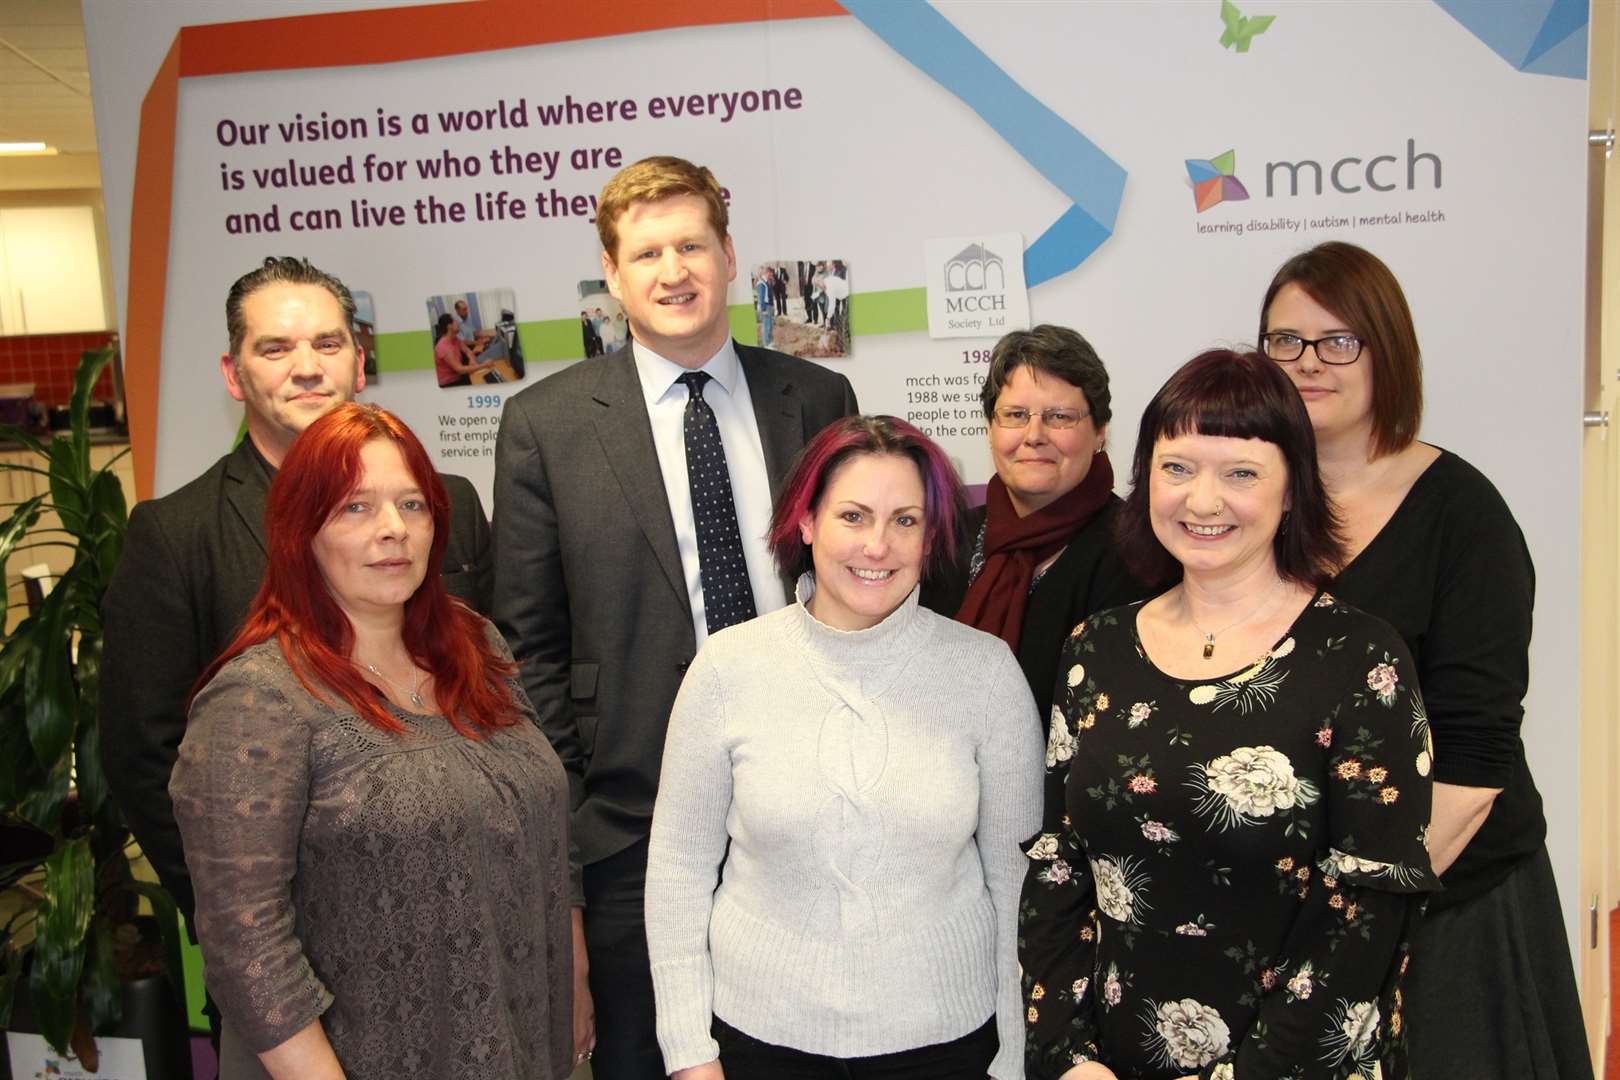 Police and crime commissioner Matthew Scott visiting mcch. Picture: mcch